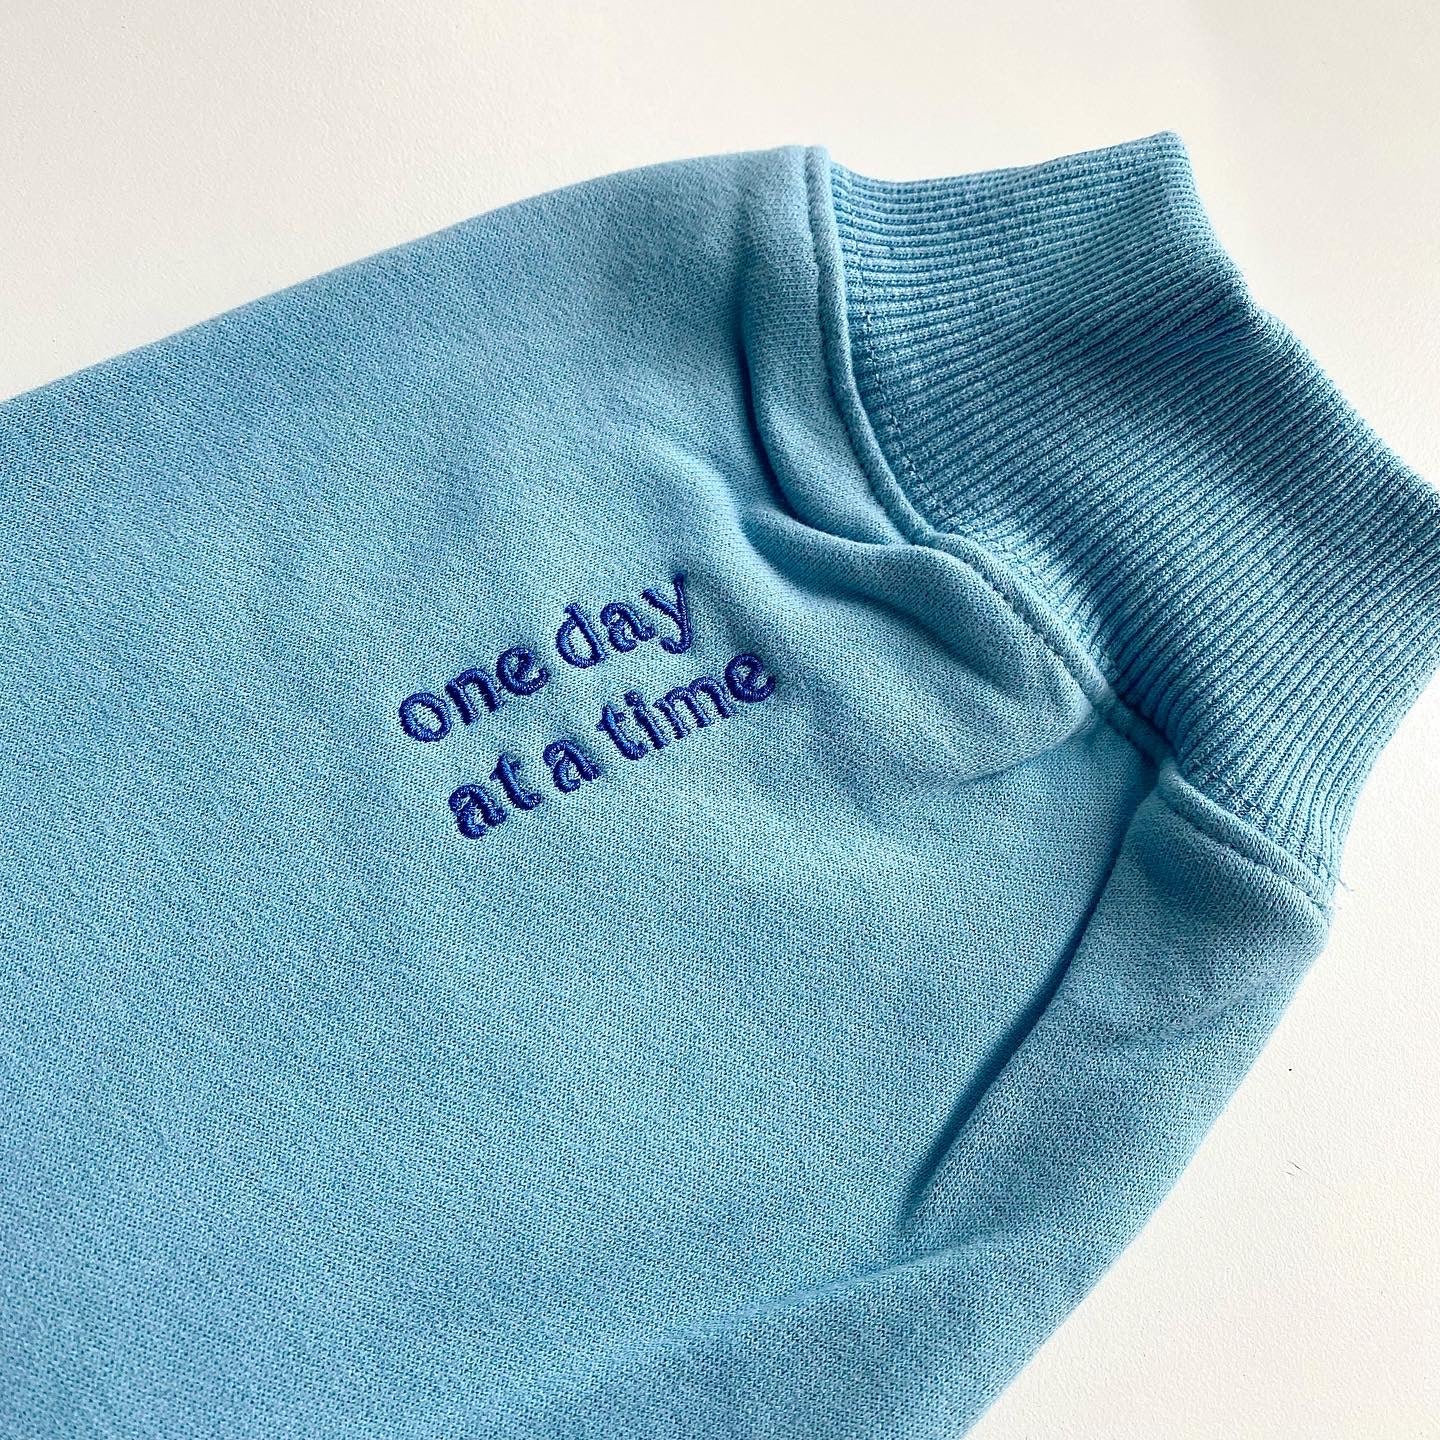 Breathe (one day at a time) Sweatshirt - Emacity Threads